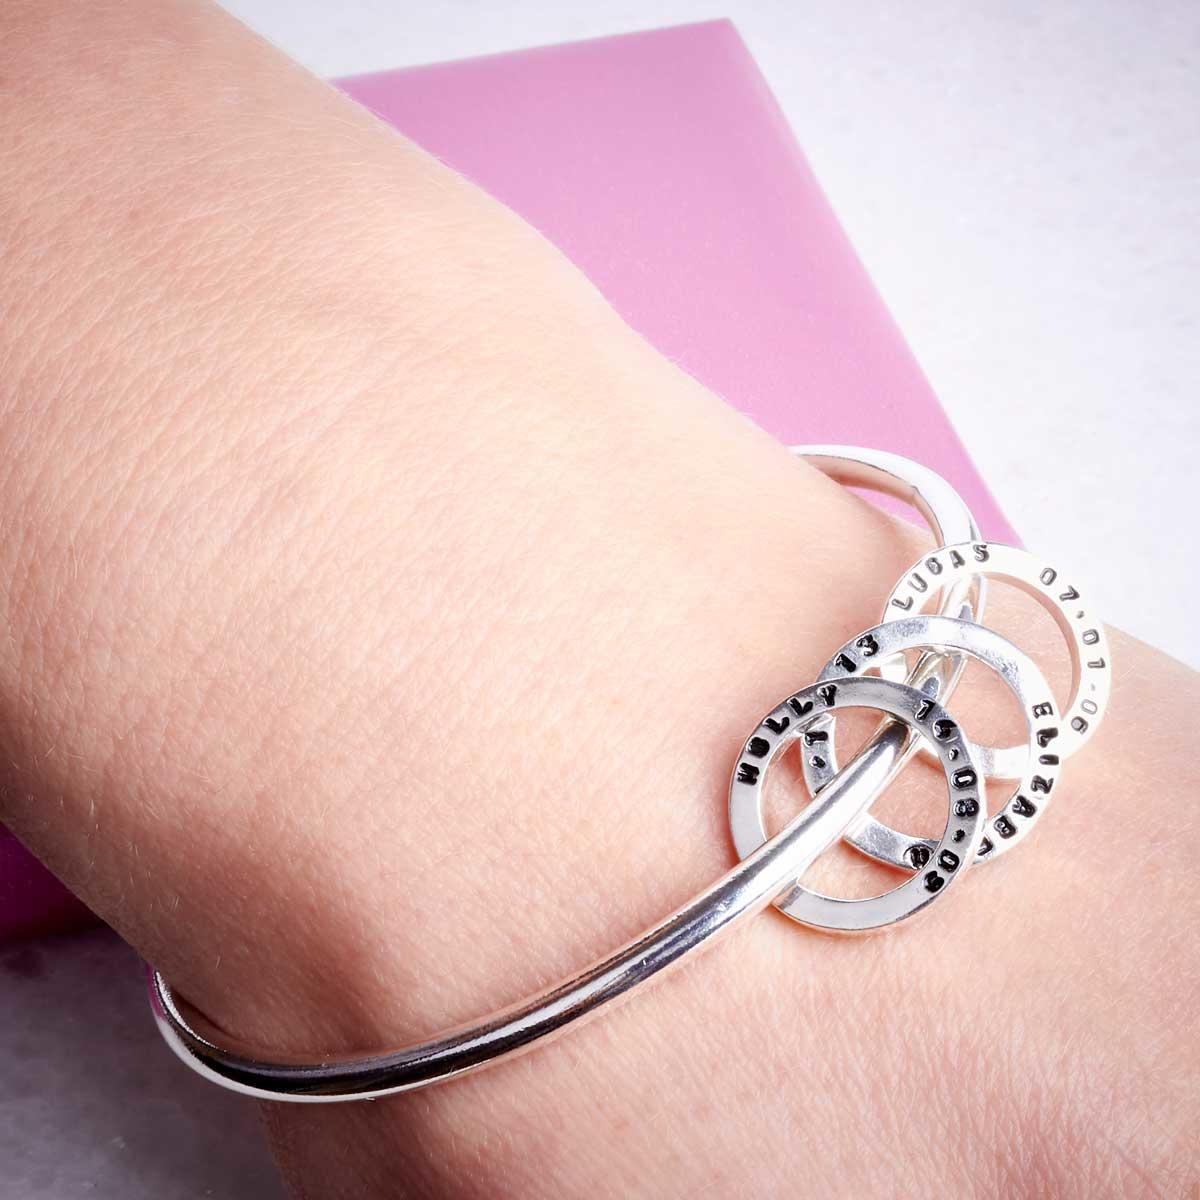 Handmade silver bangle with personalised silver beads by Emma White. Image property of THE JEWELLERY MAKERS-1